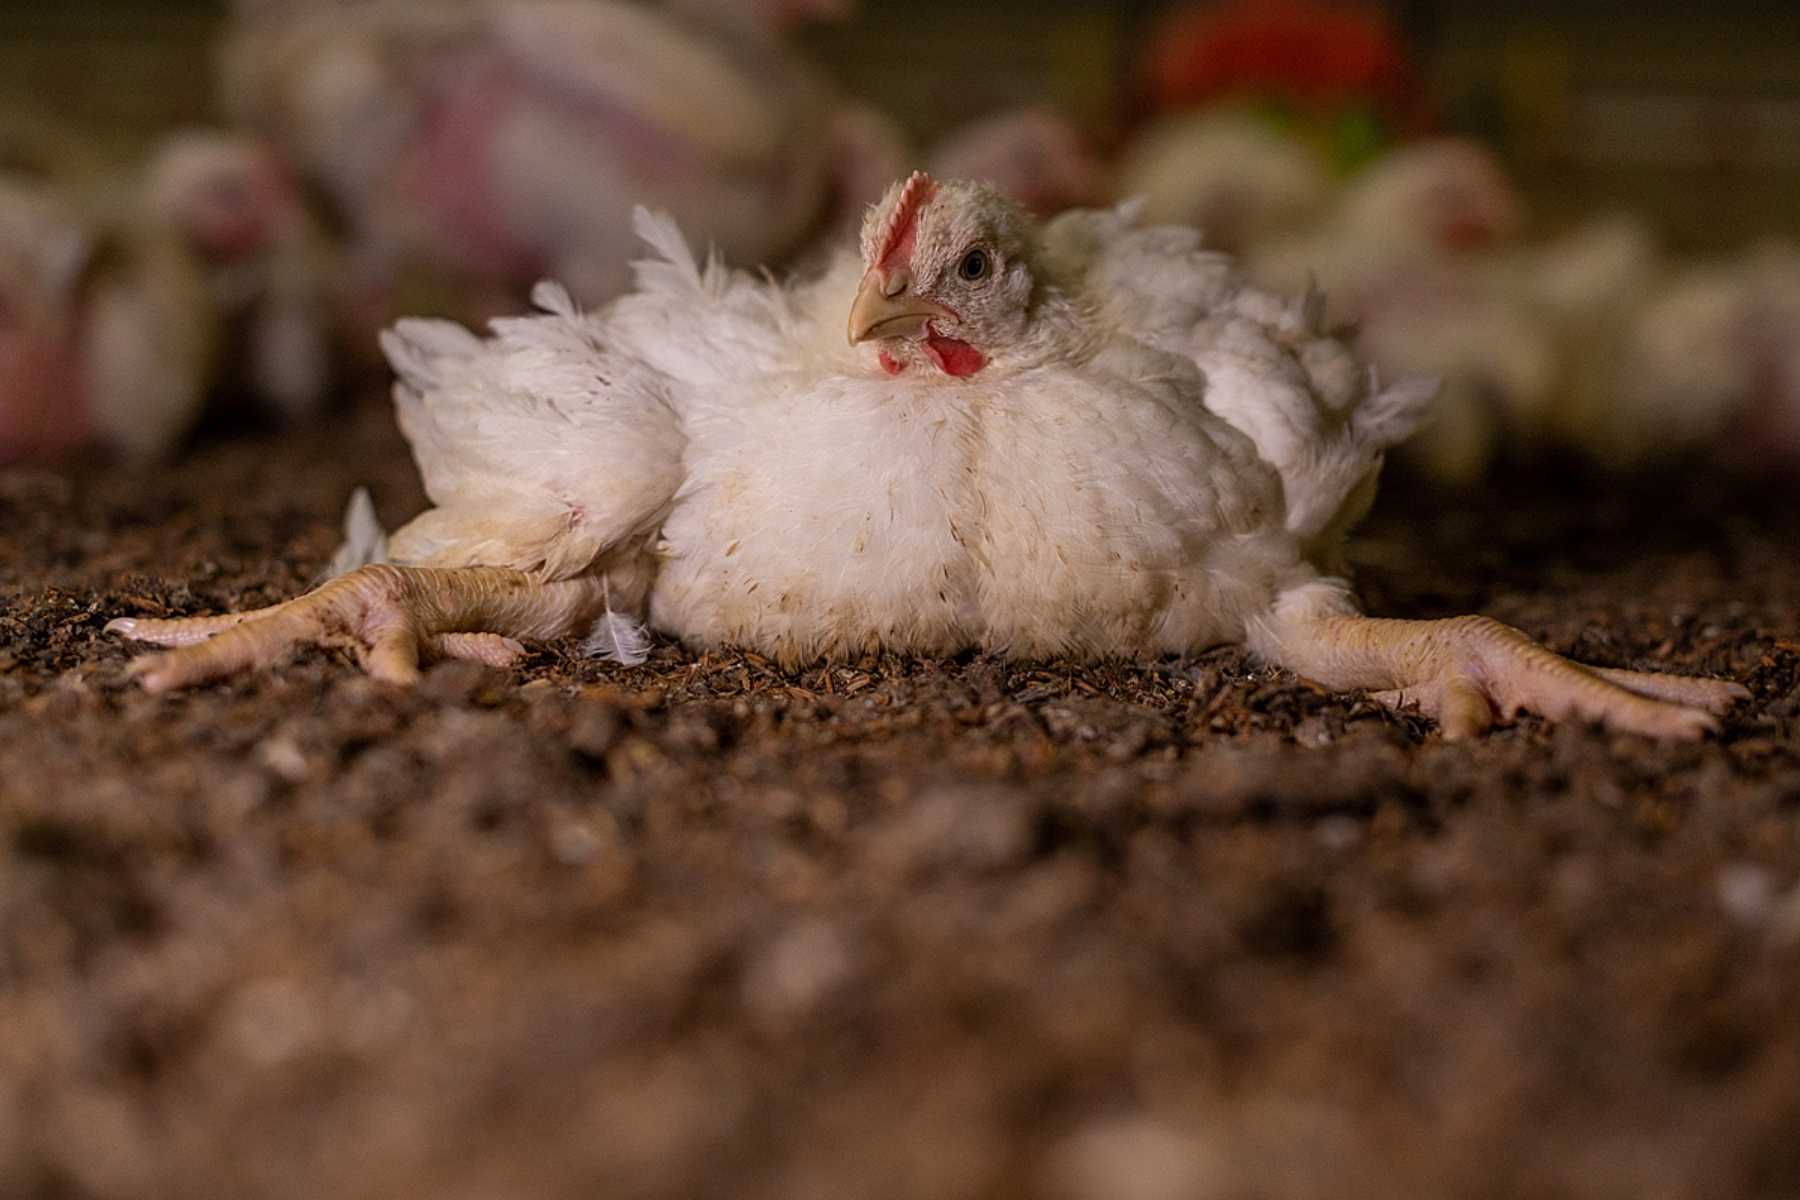 Unable to stand or walk, a chicken with splayed out legs sits on their stomach inside a broiler chicken farm in Italy. This is a common issue for five to six-week old broiler chickens, making it impossible for them to reach water.